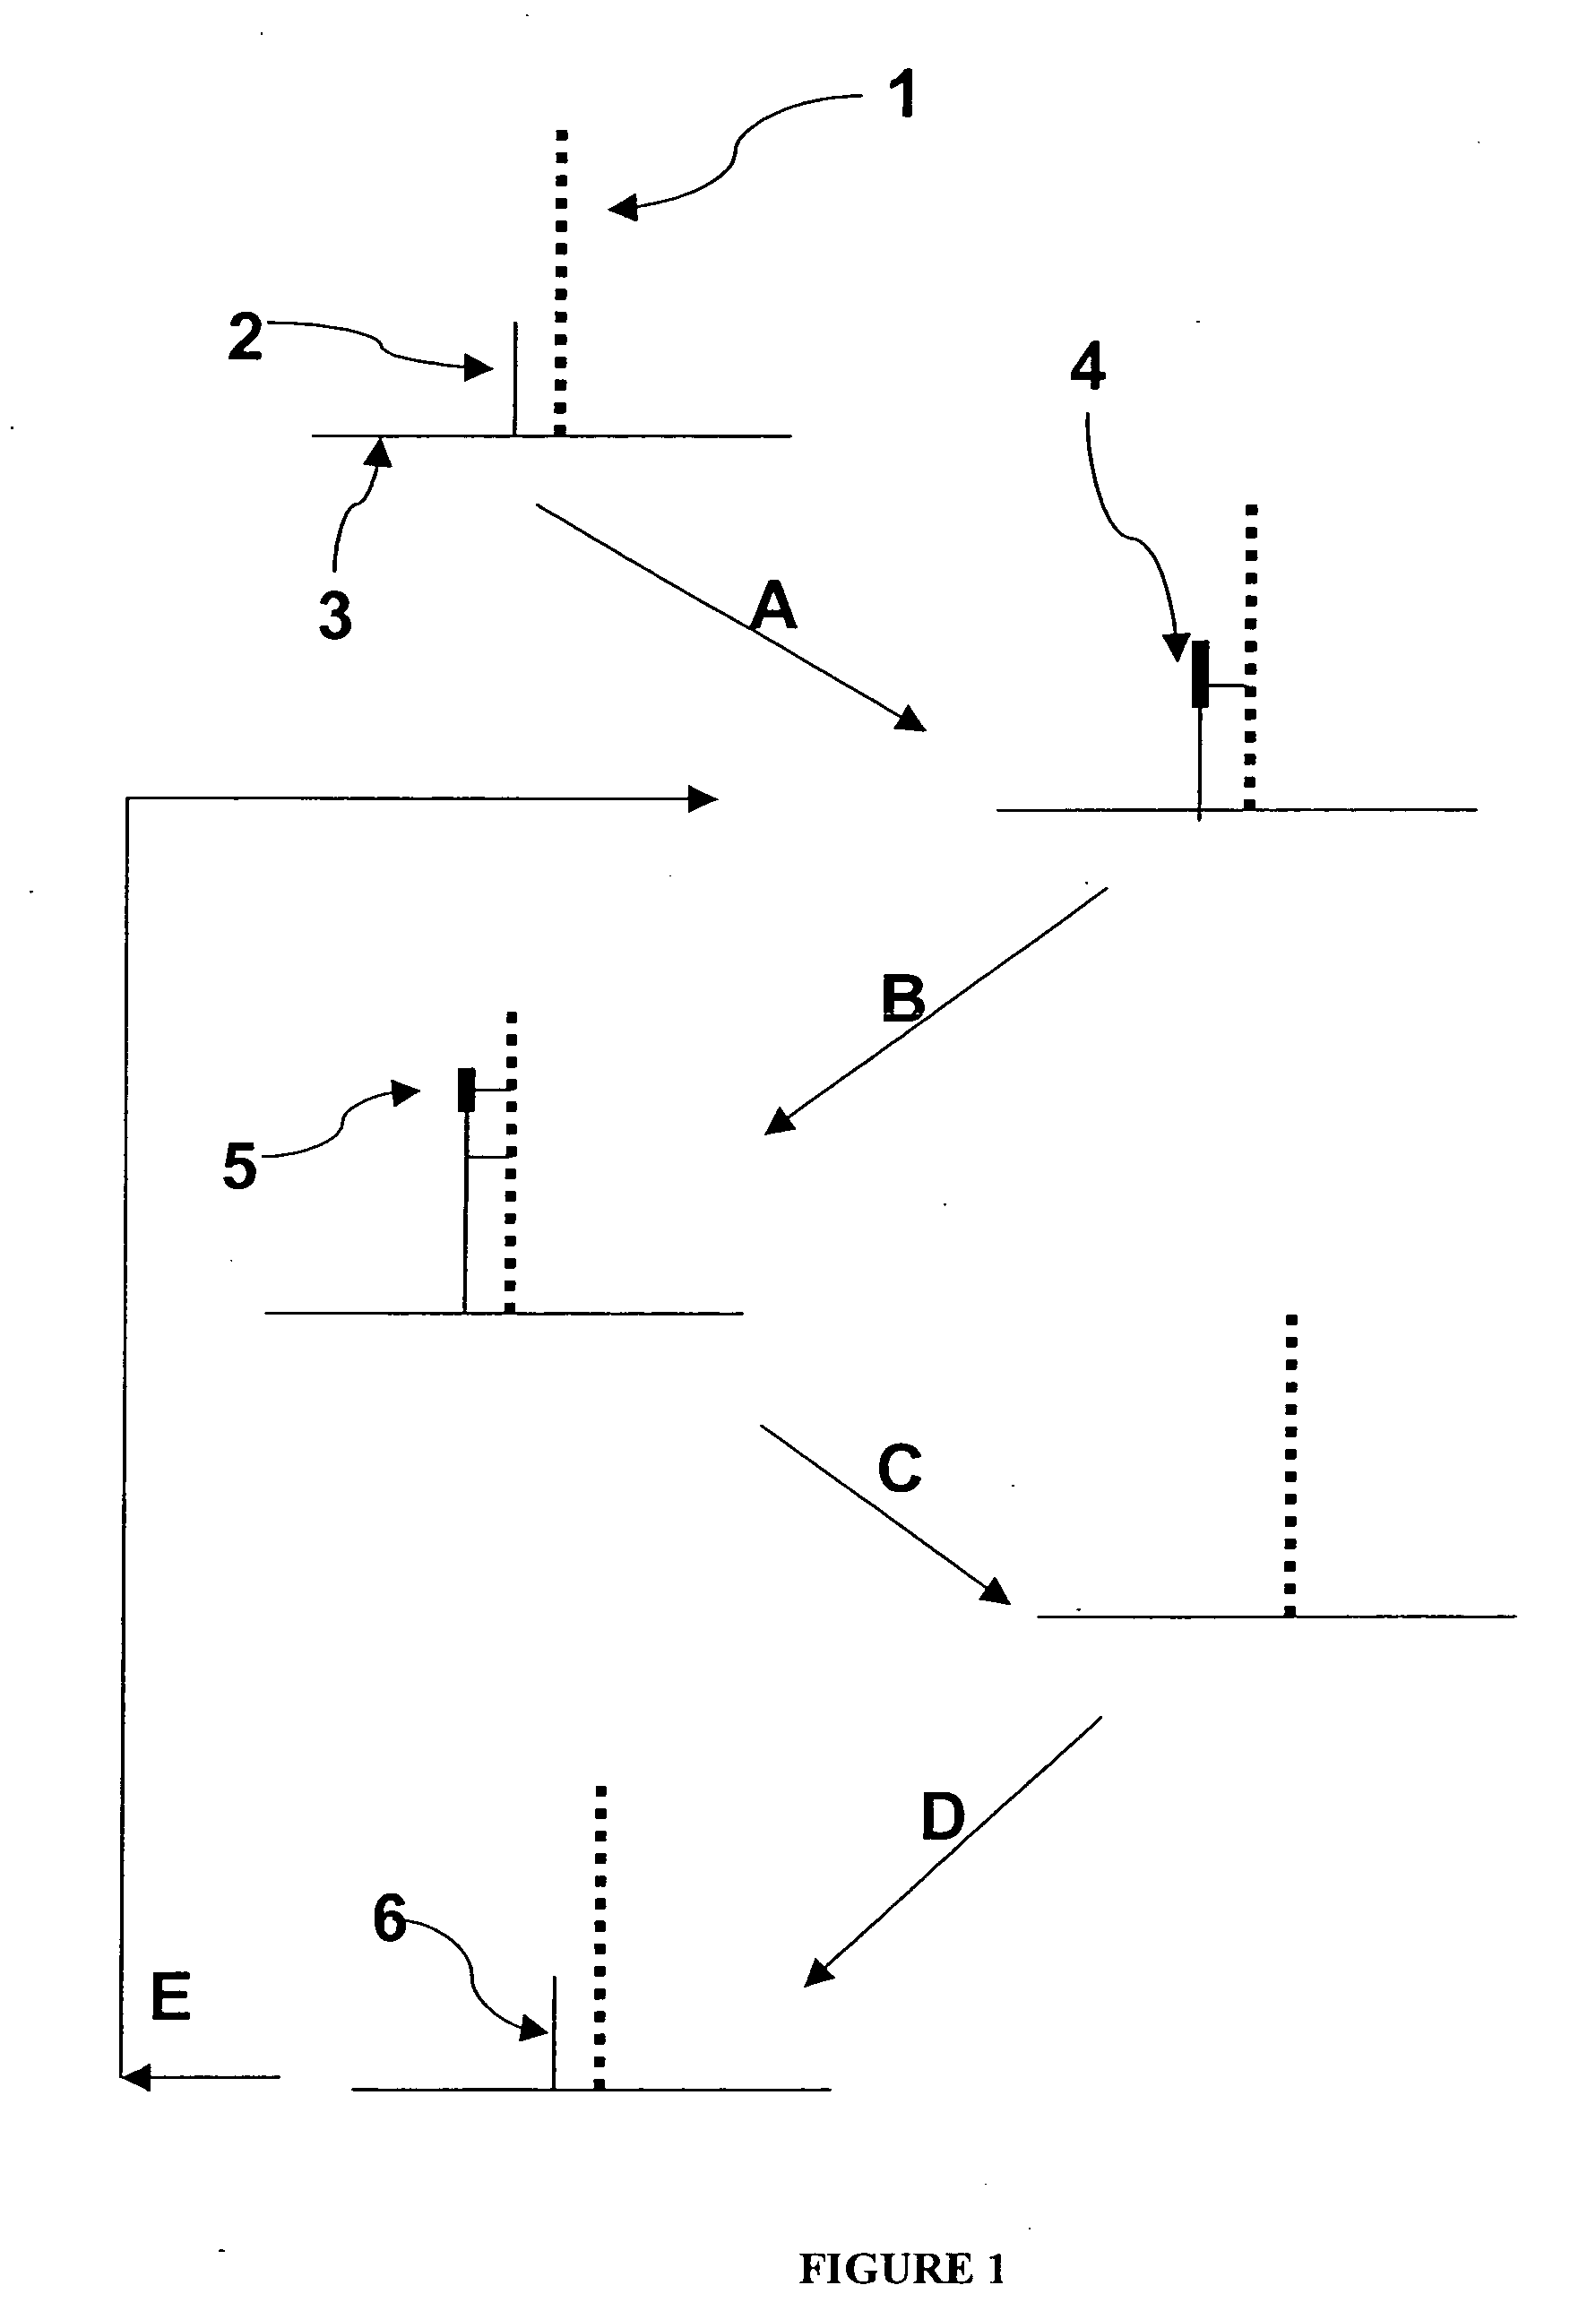 Methods for increasing accuracy of nucleic acid sequencing